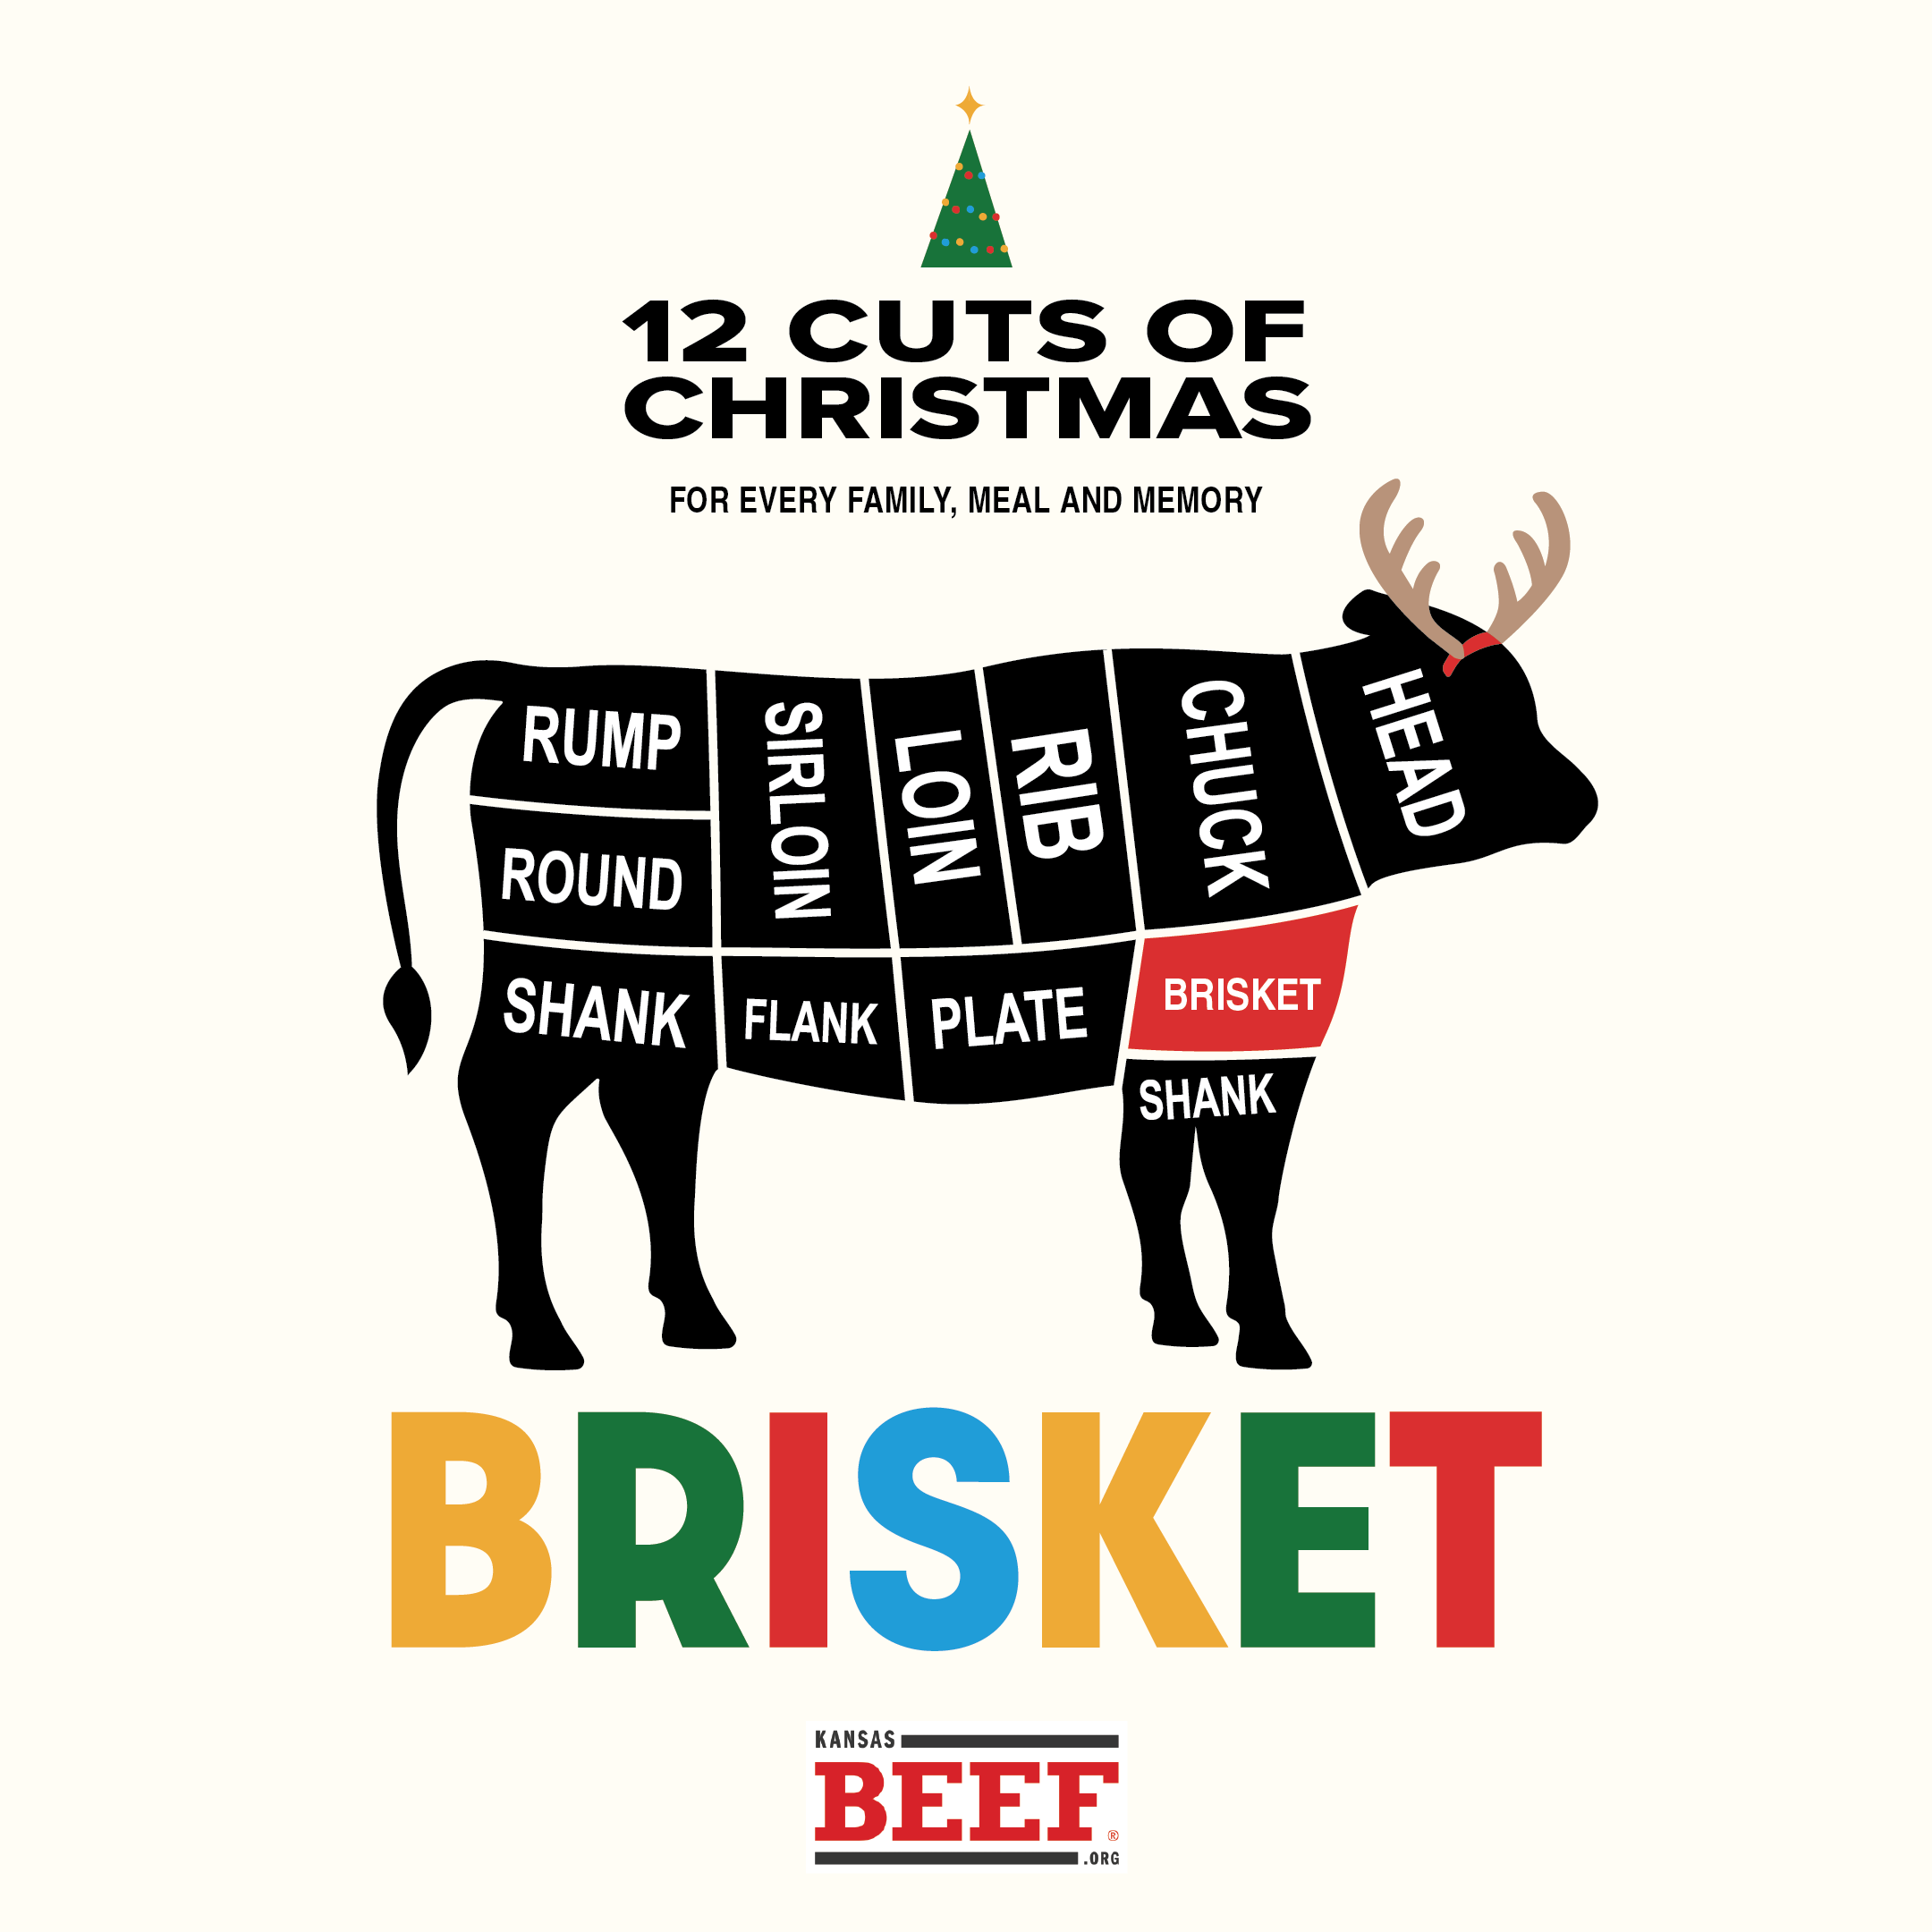 the brisket day of kansas beef council 12 cuts of christmas social media campaign